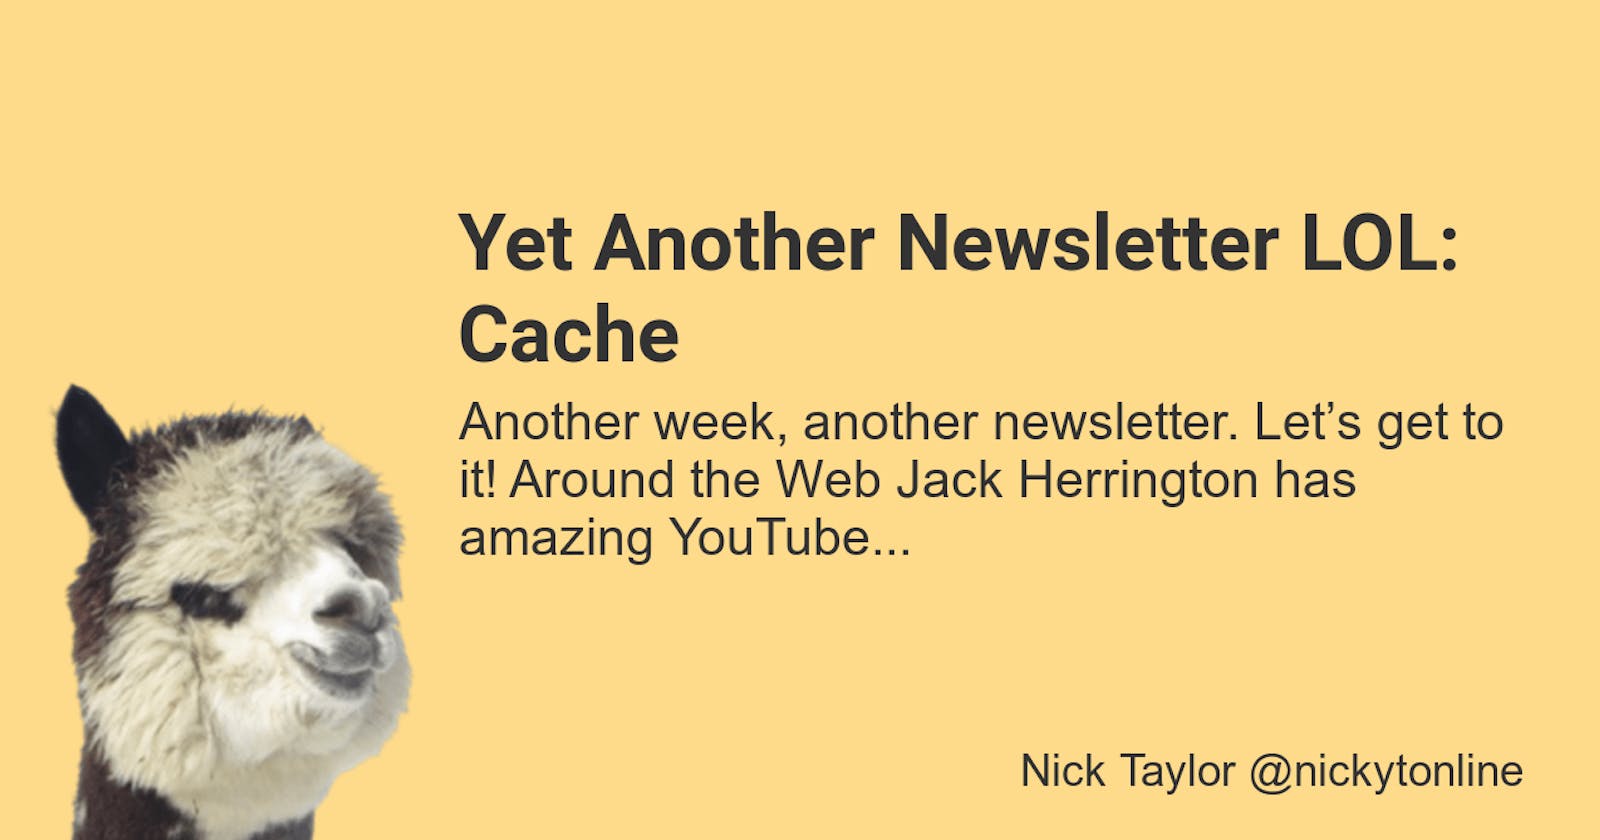 Yet Another Newsletter LOL: Cache